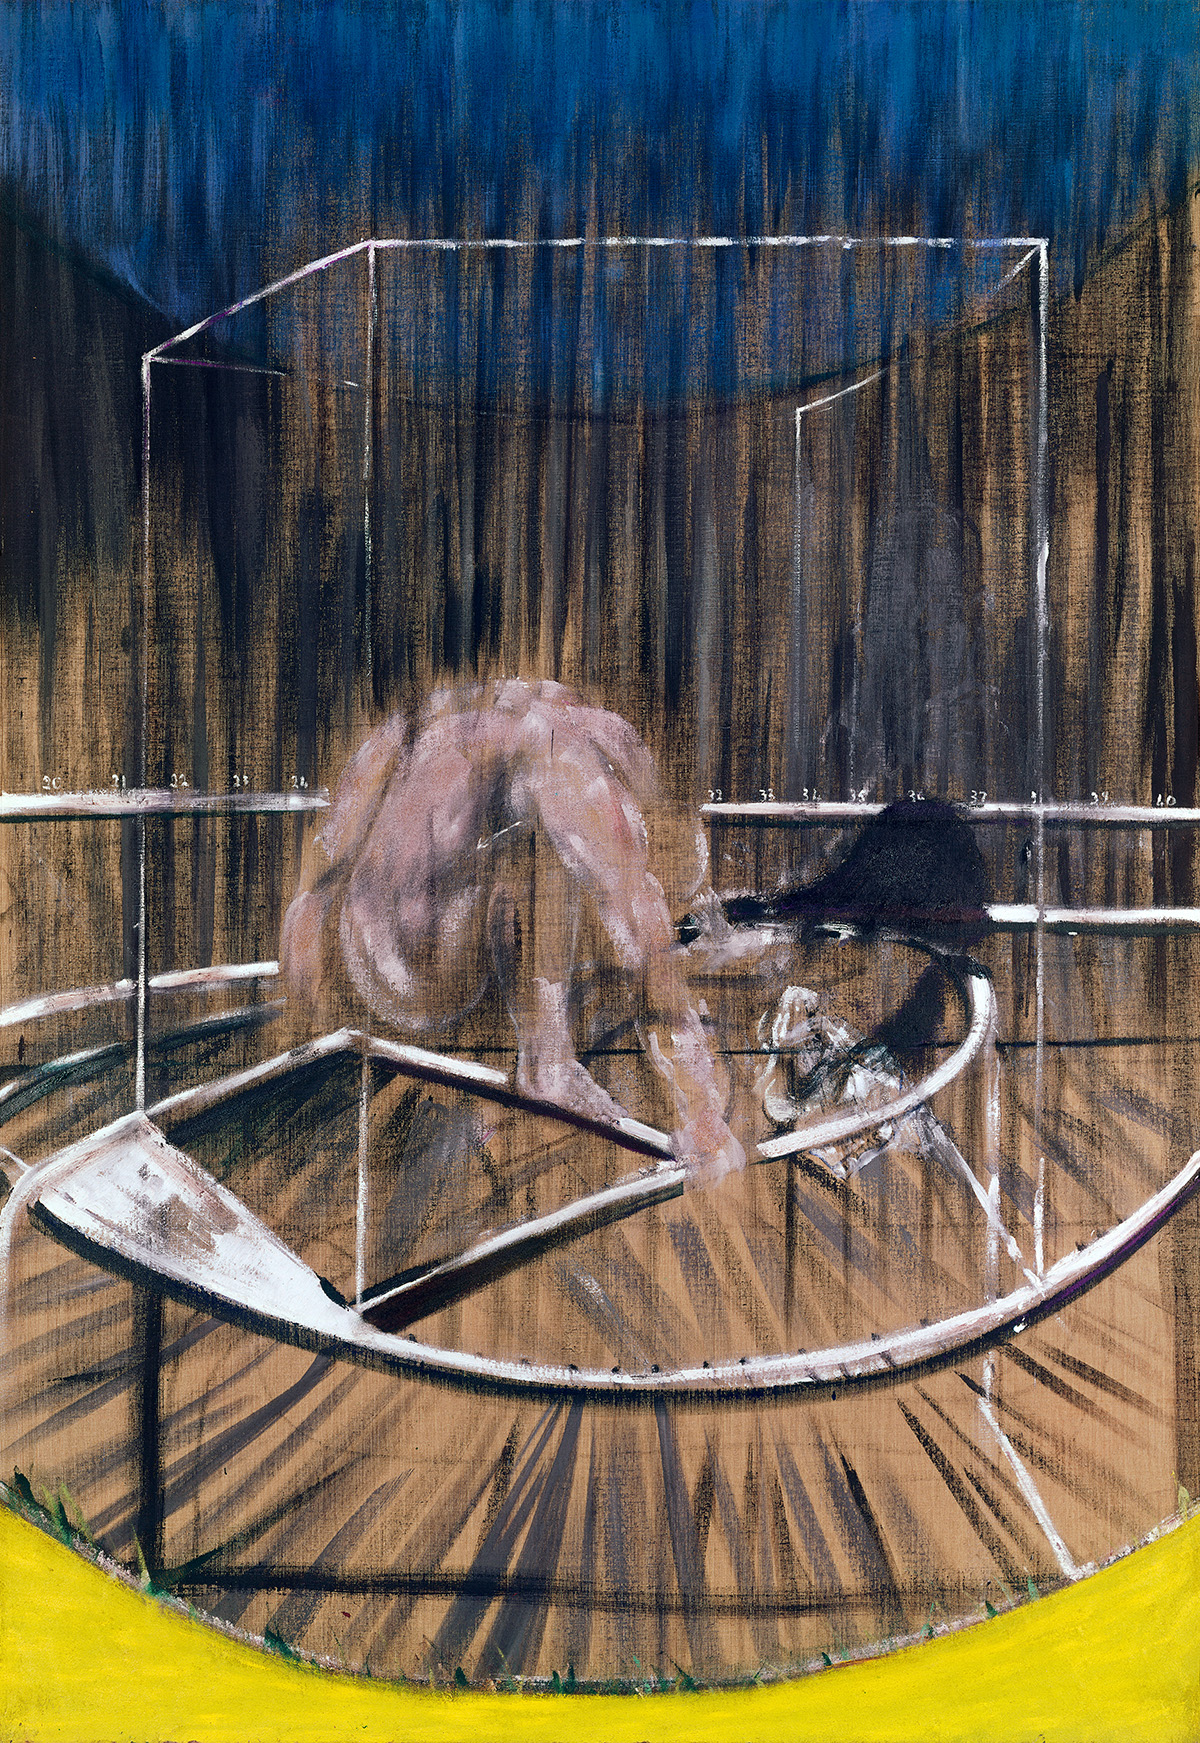 Francis Bacon, Study for Crouching Nude, 1952. Oil on canvas. CR number 52-01. © The Estate of Francis Bacon / DACS London 2020. All rights reserved.